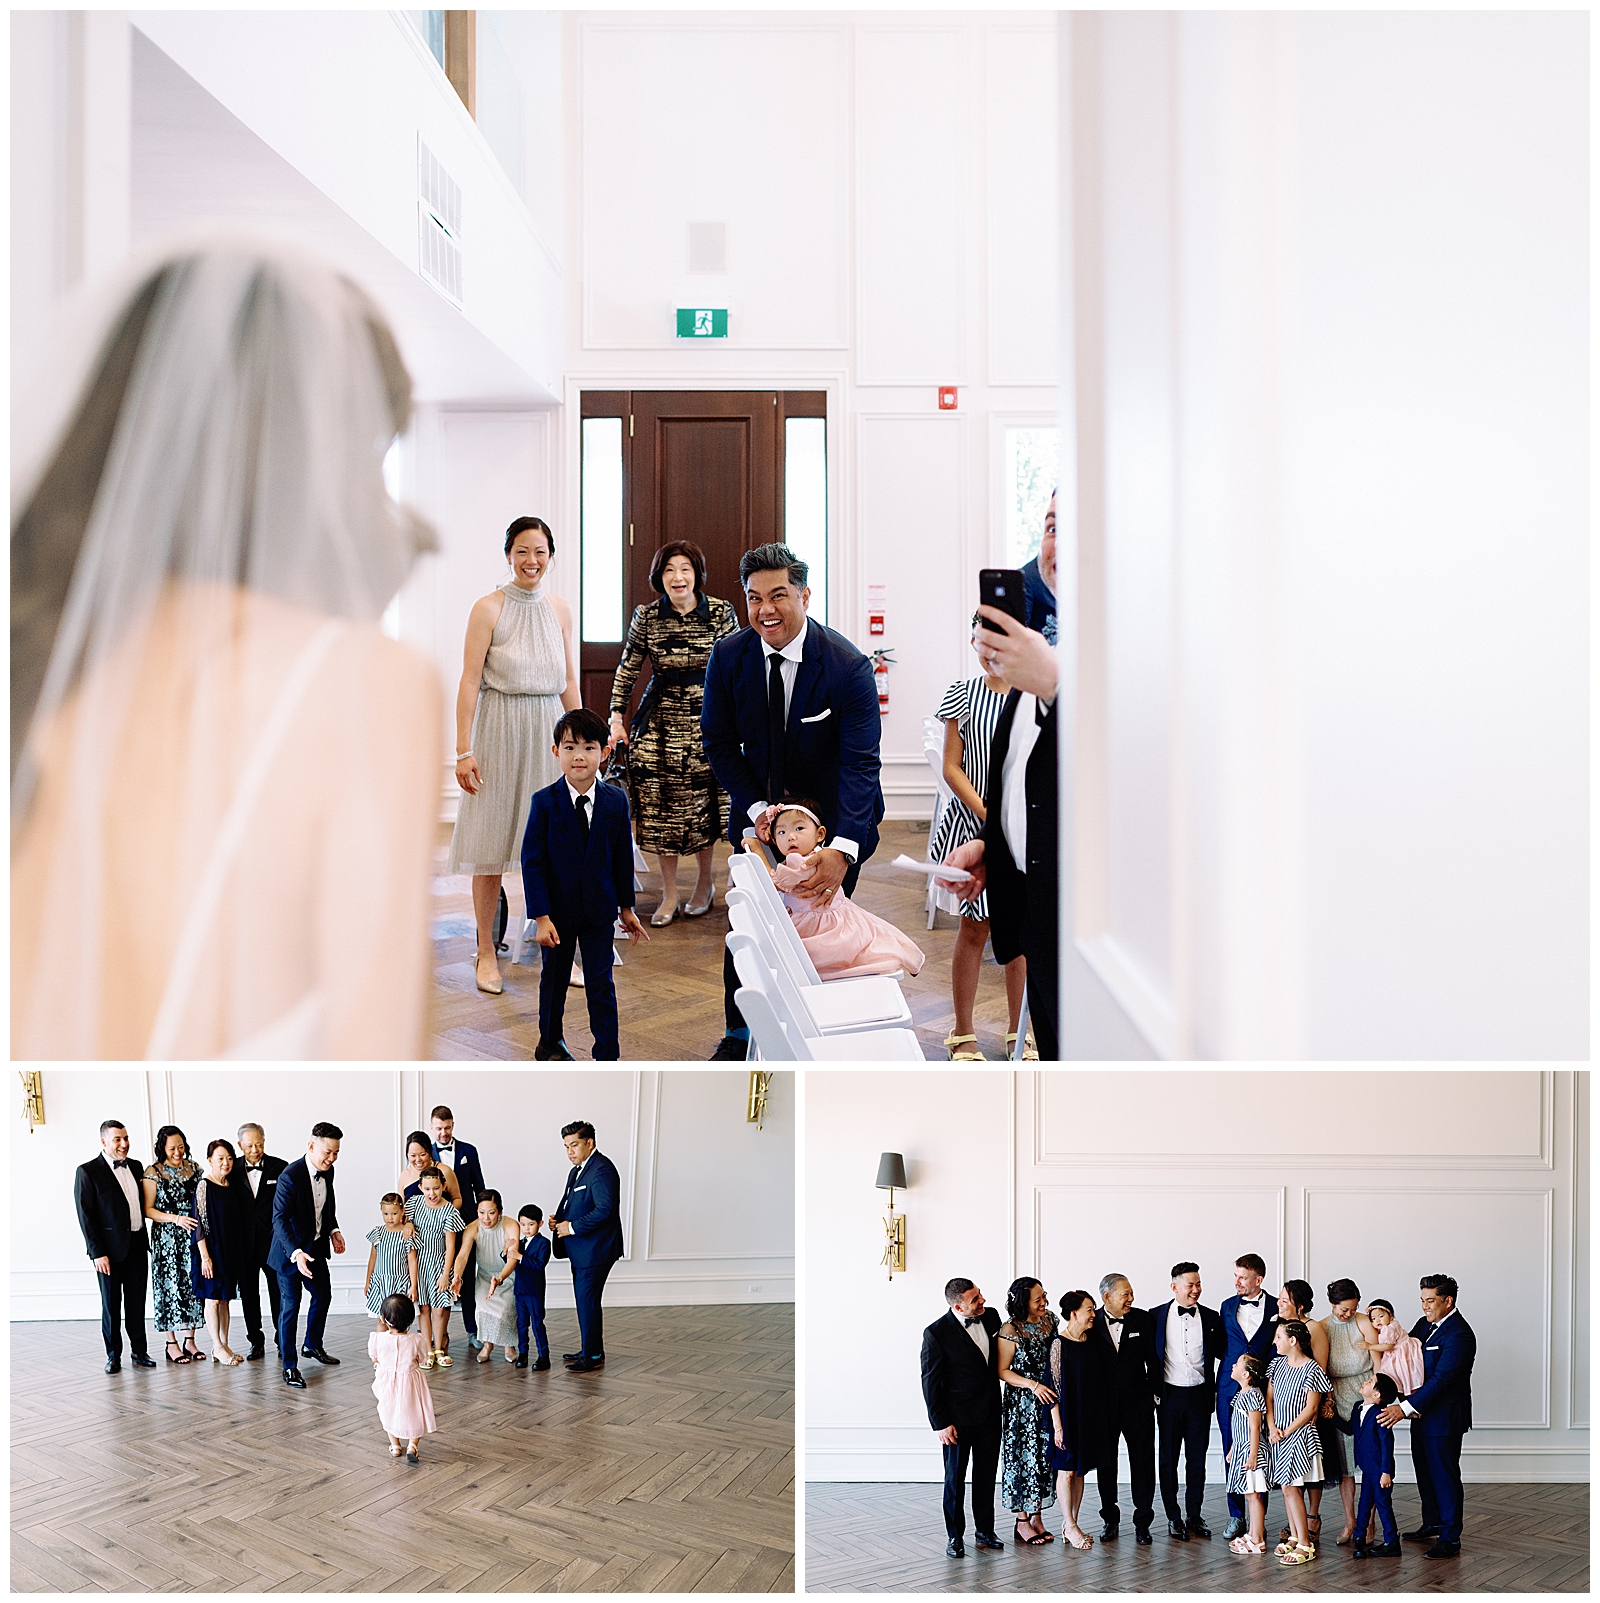 Couple Meets and Surprises Family on Wedding Day Happy Excited Sophisticated Toronto at Arlington Estate Wedding Venue, Summer Intimate Elopement| Jacqueline James Photography for modern wild romantics